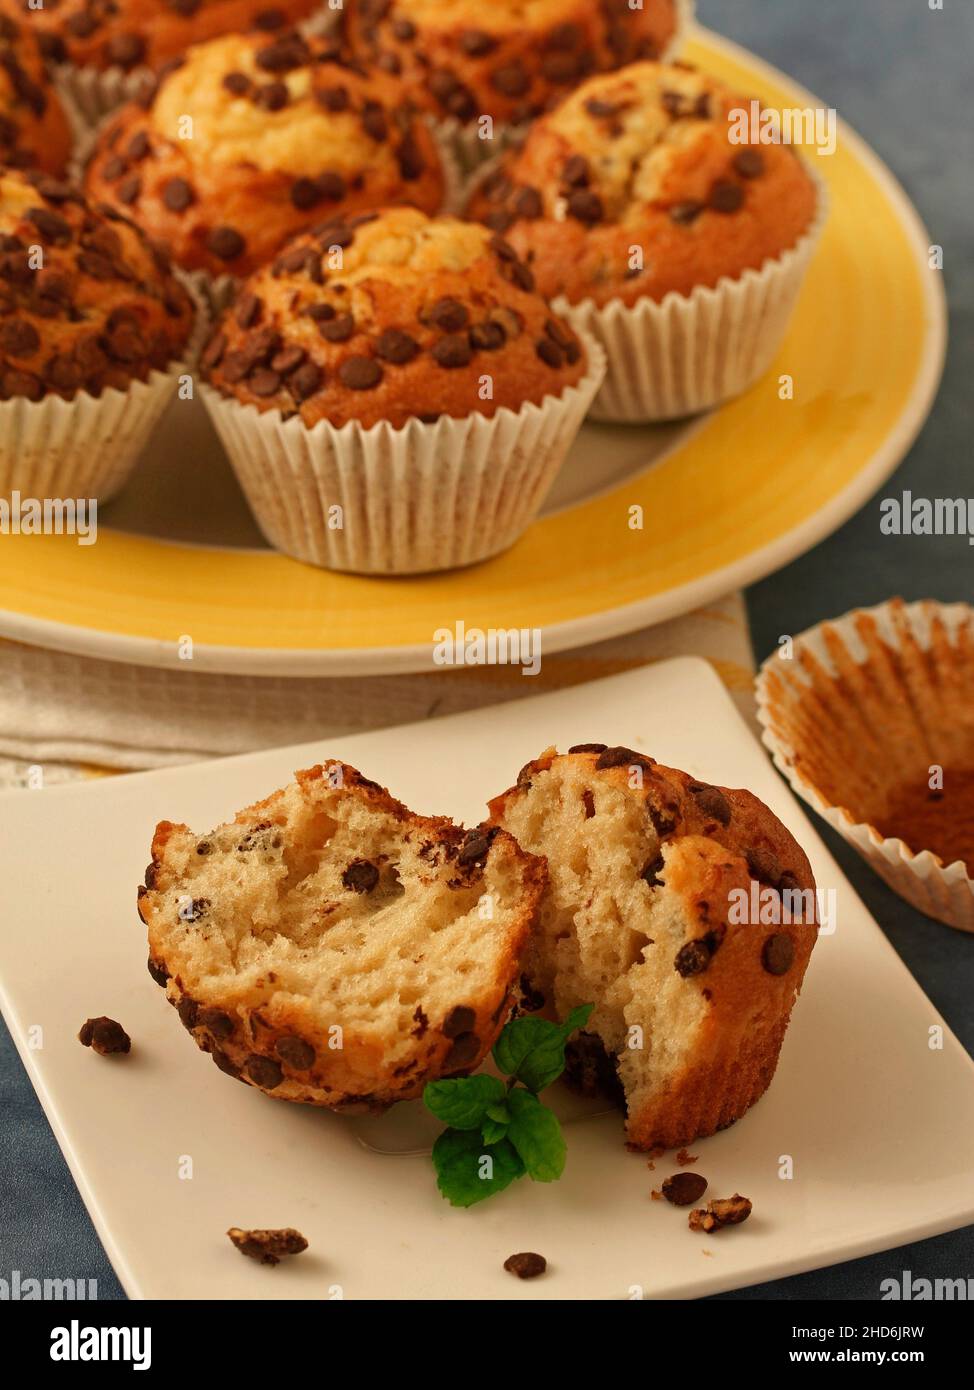 Muffins with chocolate. Stock Photo